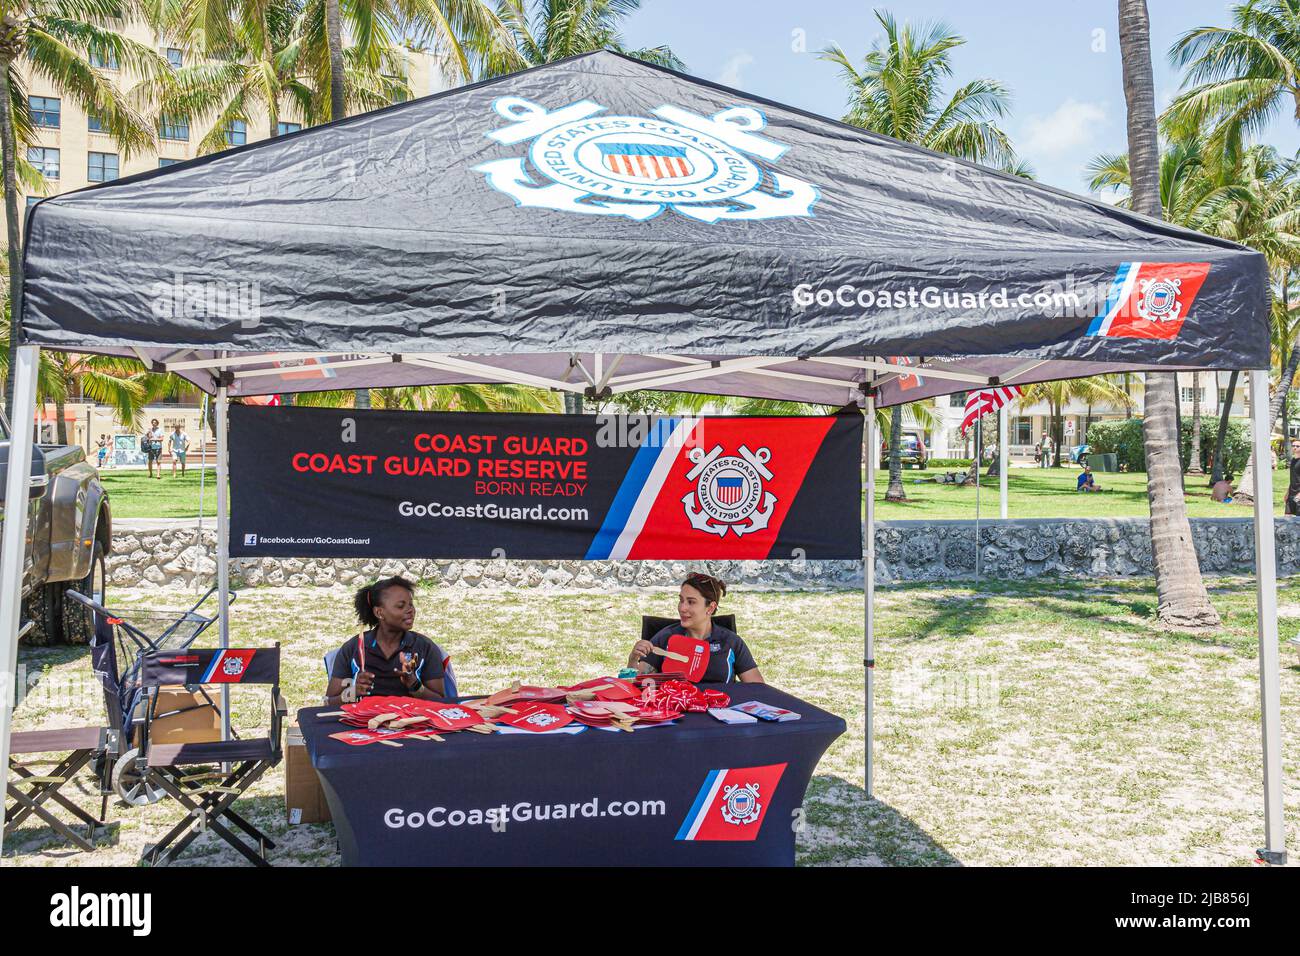 Miami Beach Florida,Hyundai Air & Sea Show Military Village vendor vendors,exhibitor exhibitors stall stalls booth booths armed forces recruiting prom Stock Photo